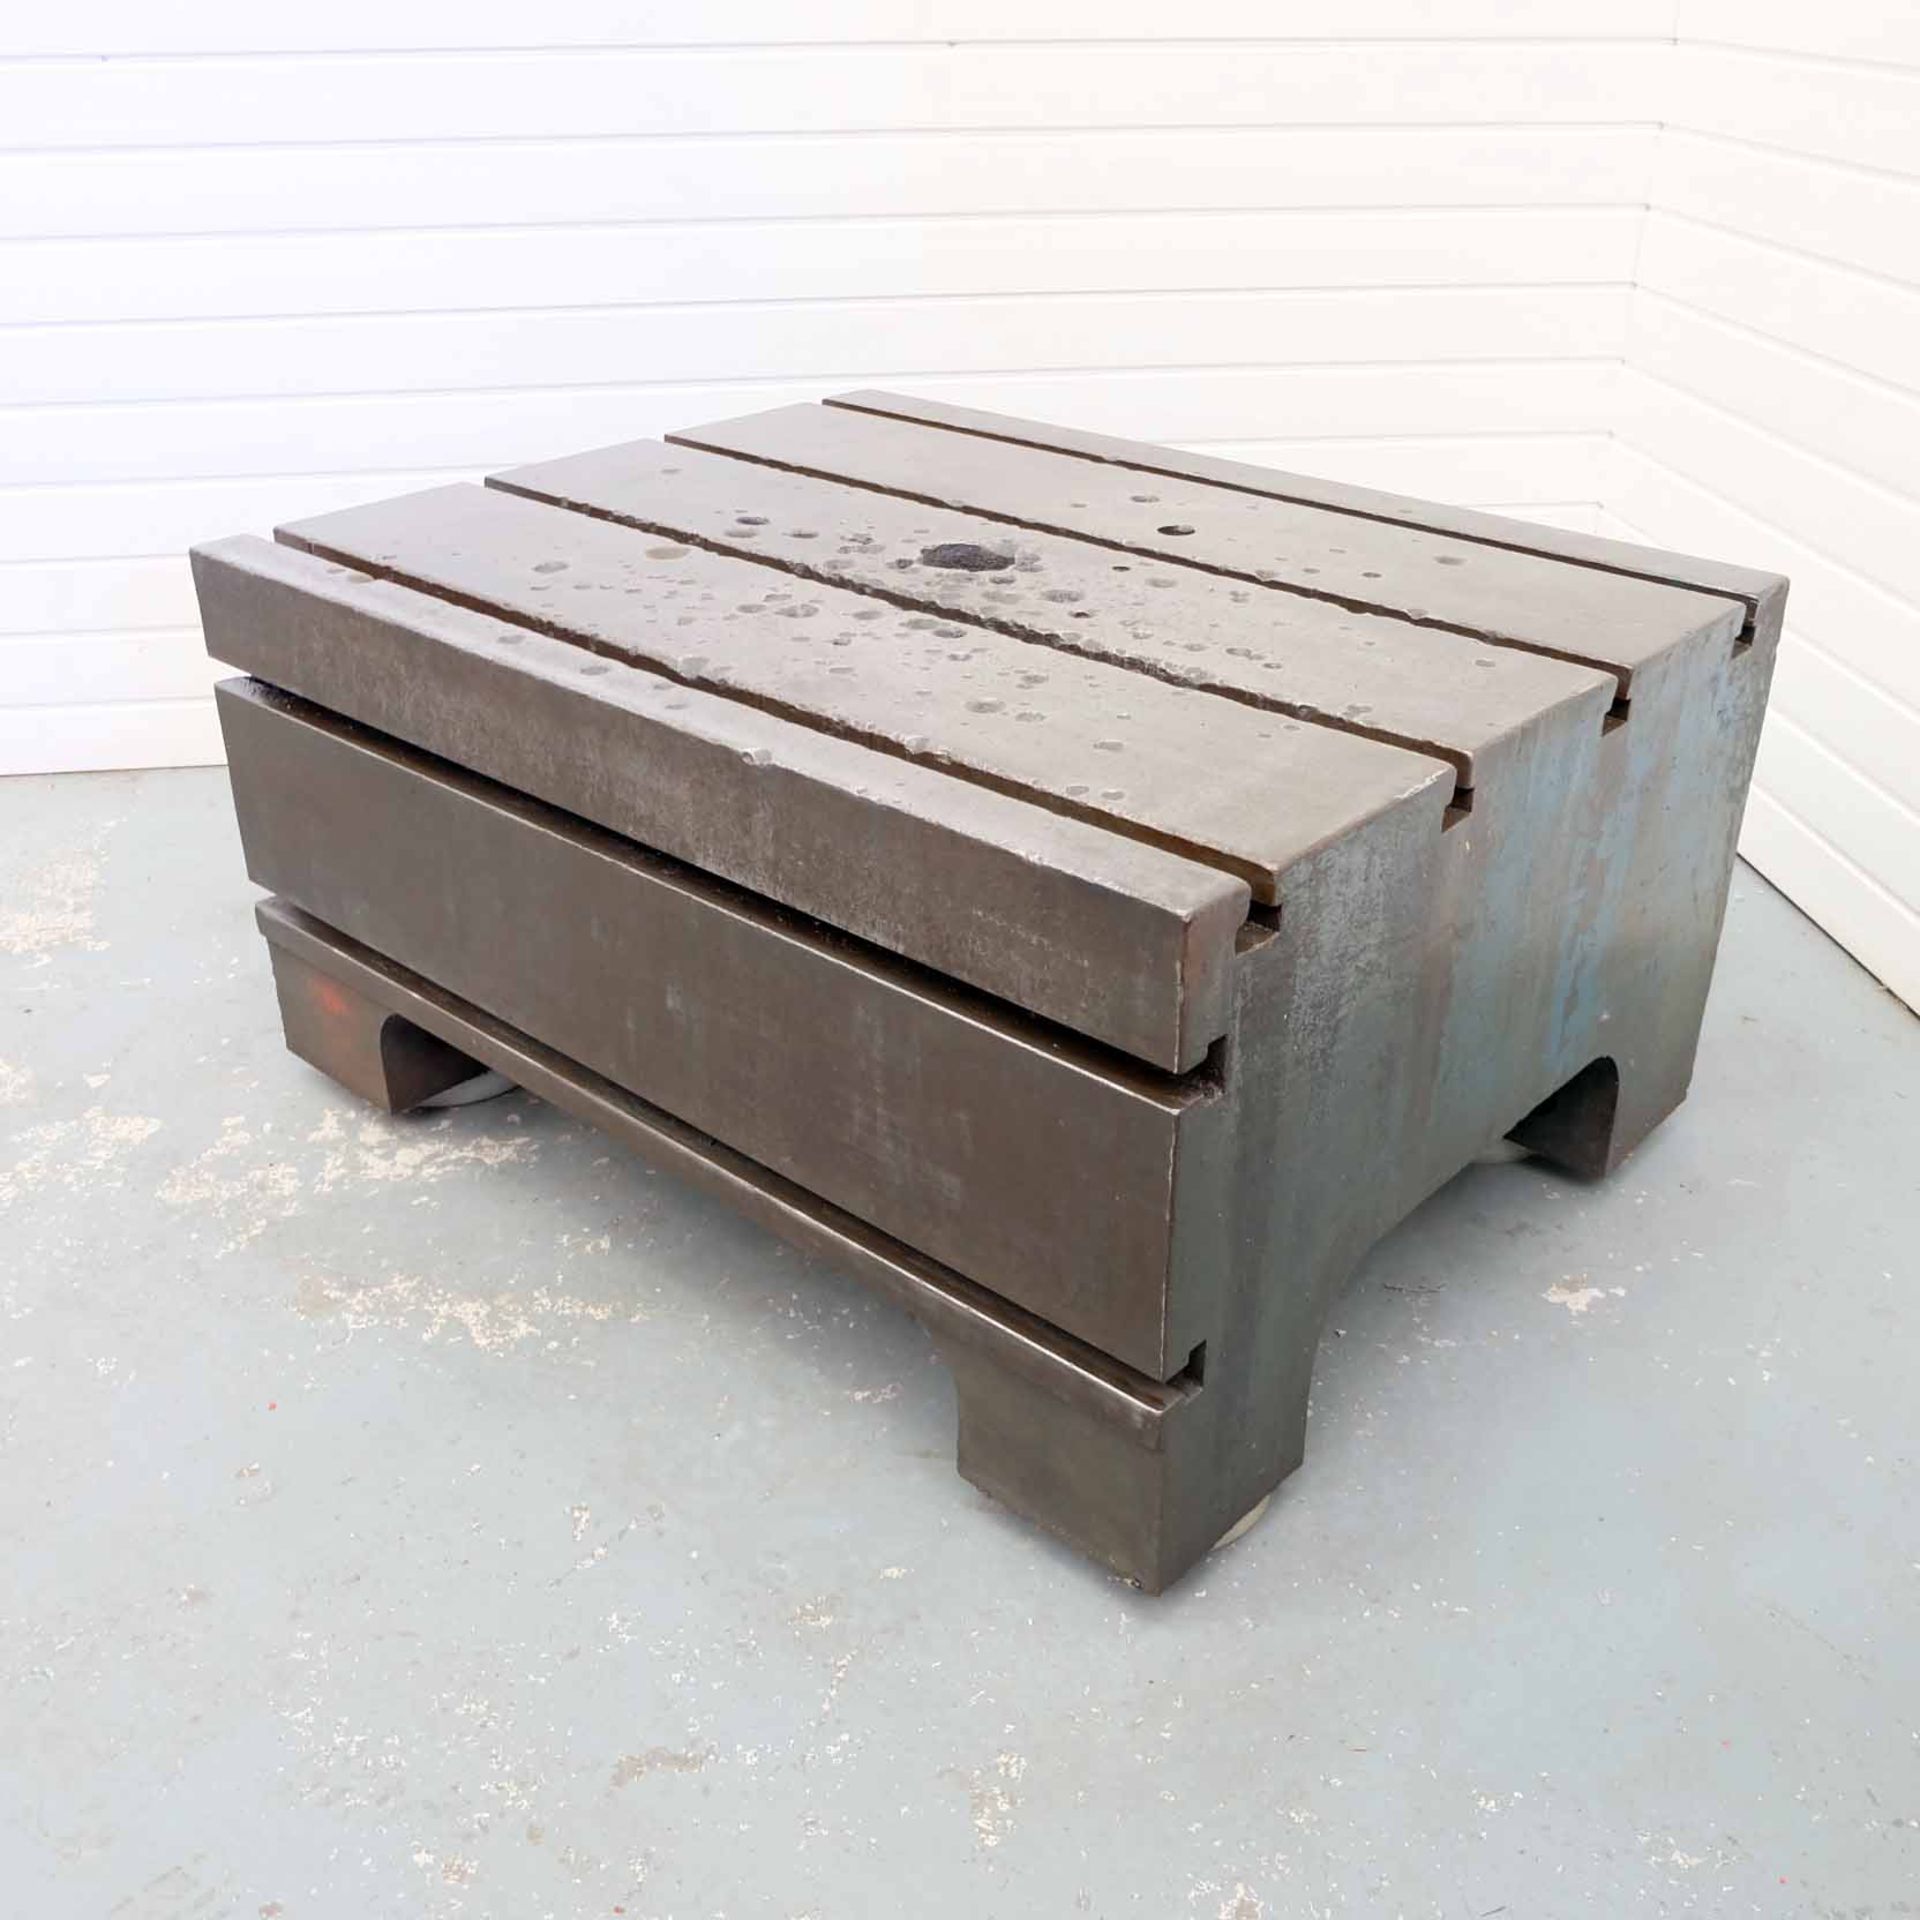 Tee Slotted Box Table. Size 42" x 33" x 20" High. 4 Tee Slots on Top. 2 Tee Slots on Front. - Image 2 of 4